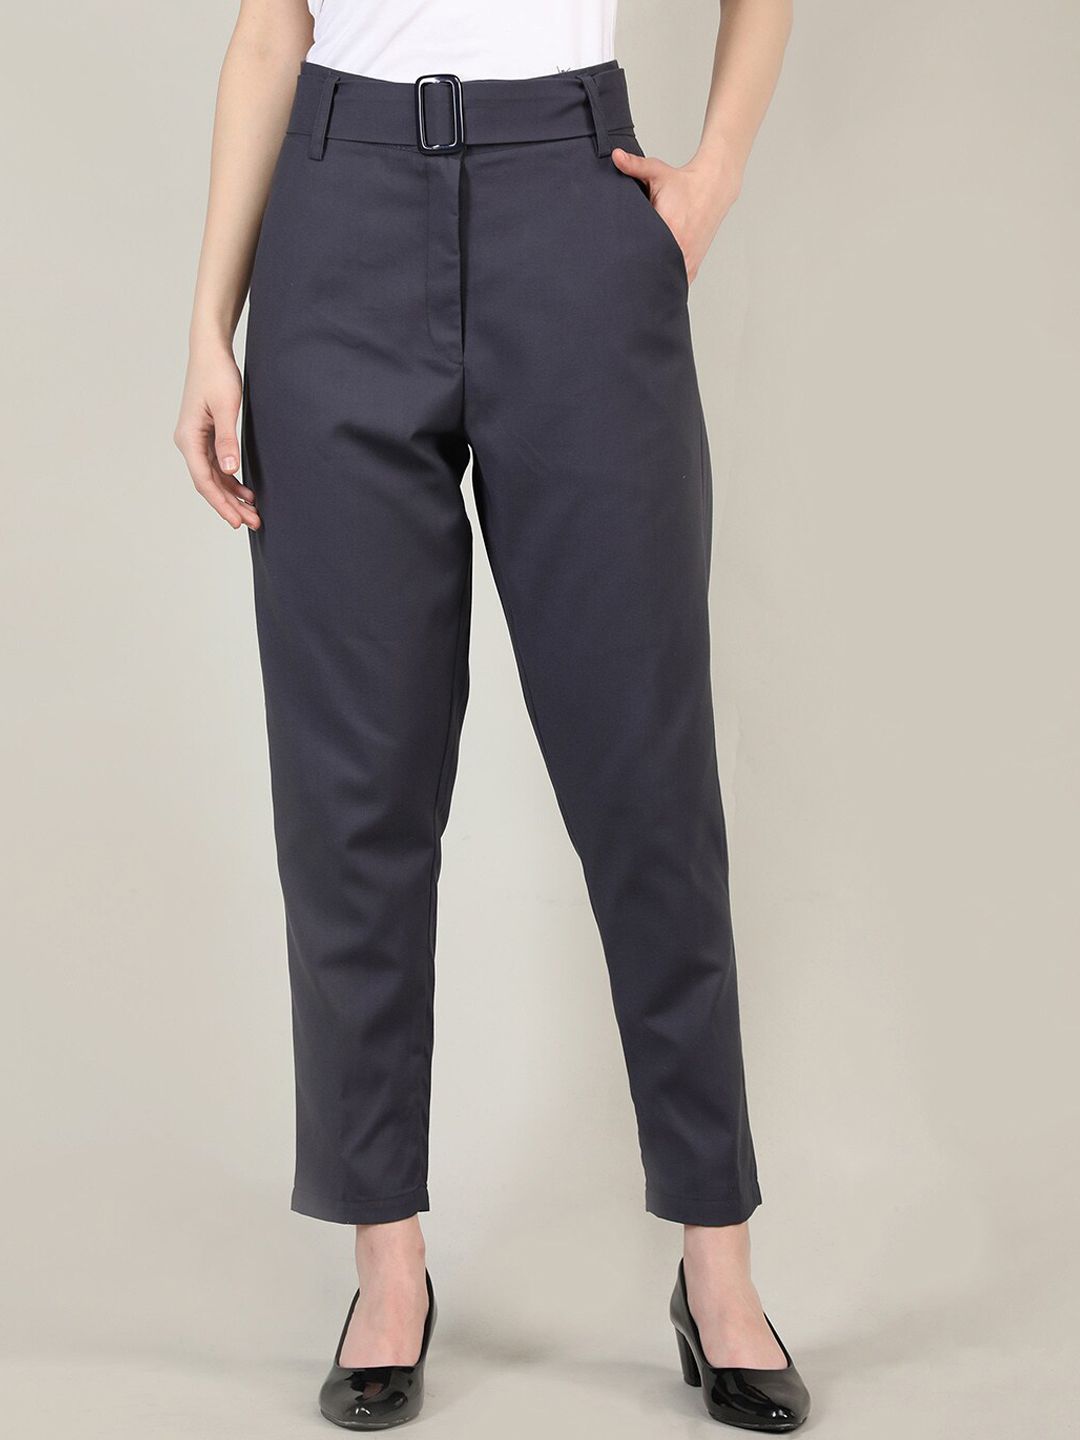 Dlanxa Women Charcoal Solid Regular Fit Formal Trousers Price in India